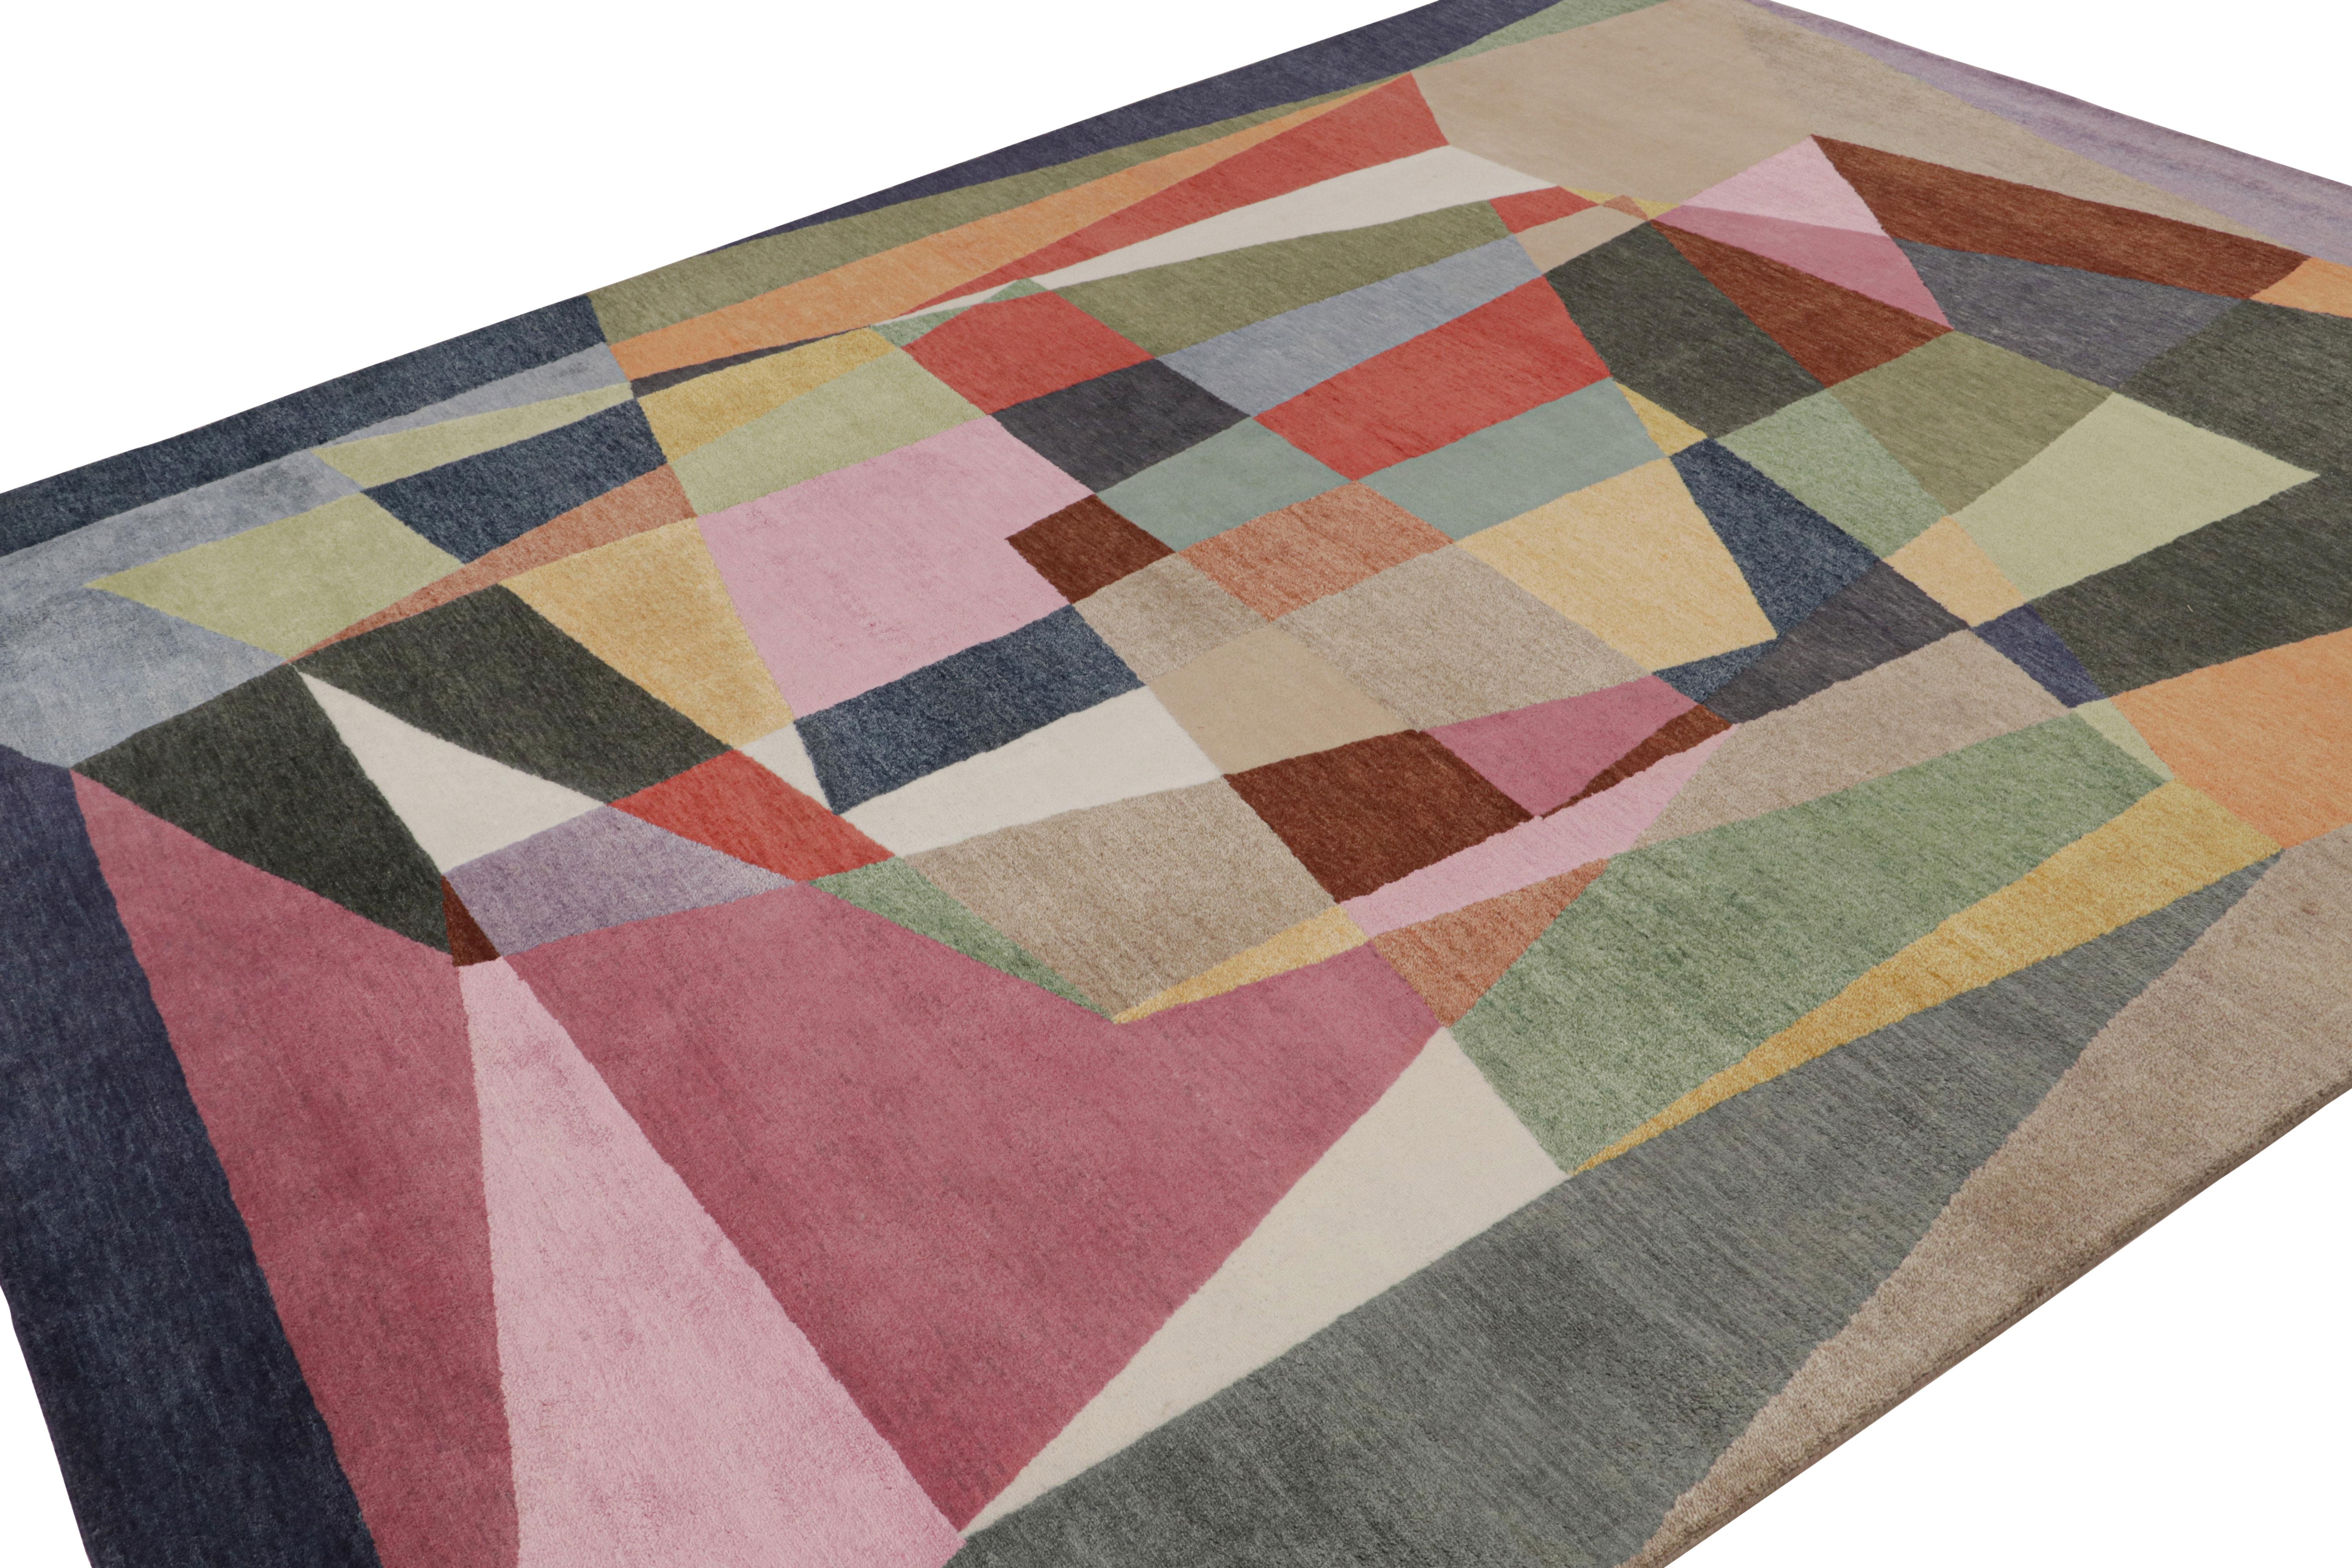 This modern 8x10 rug is an exciting new addition to the Mid-Century Modern rug collection by Rug & Kilim. Hand-knotted in wool and silk, it’s a bold take on 1950s postmodern aesthetics never-before seen in this quality.

On the design: 

Inspired